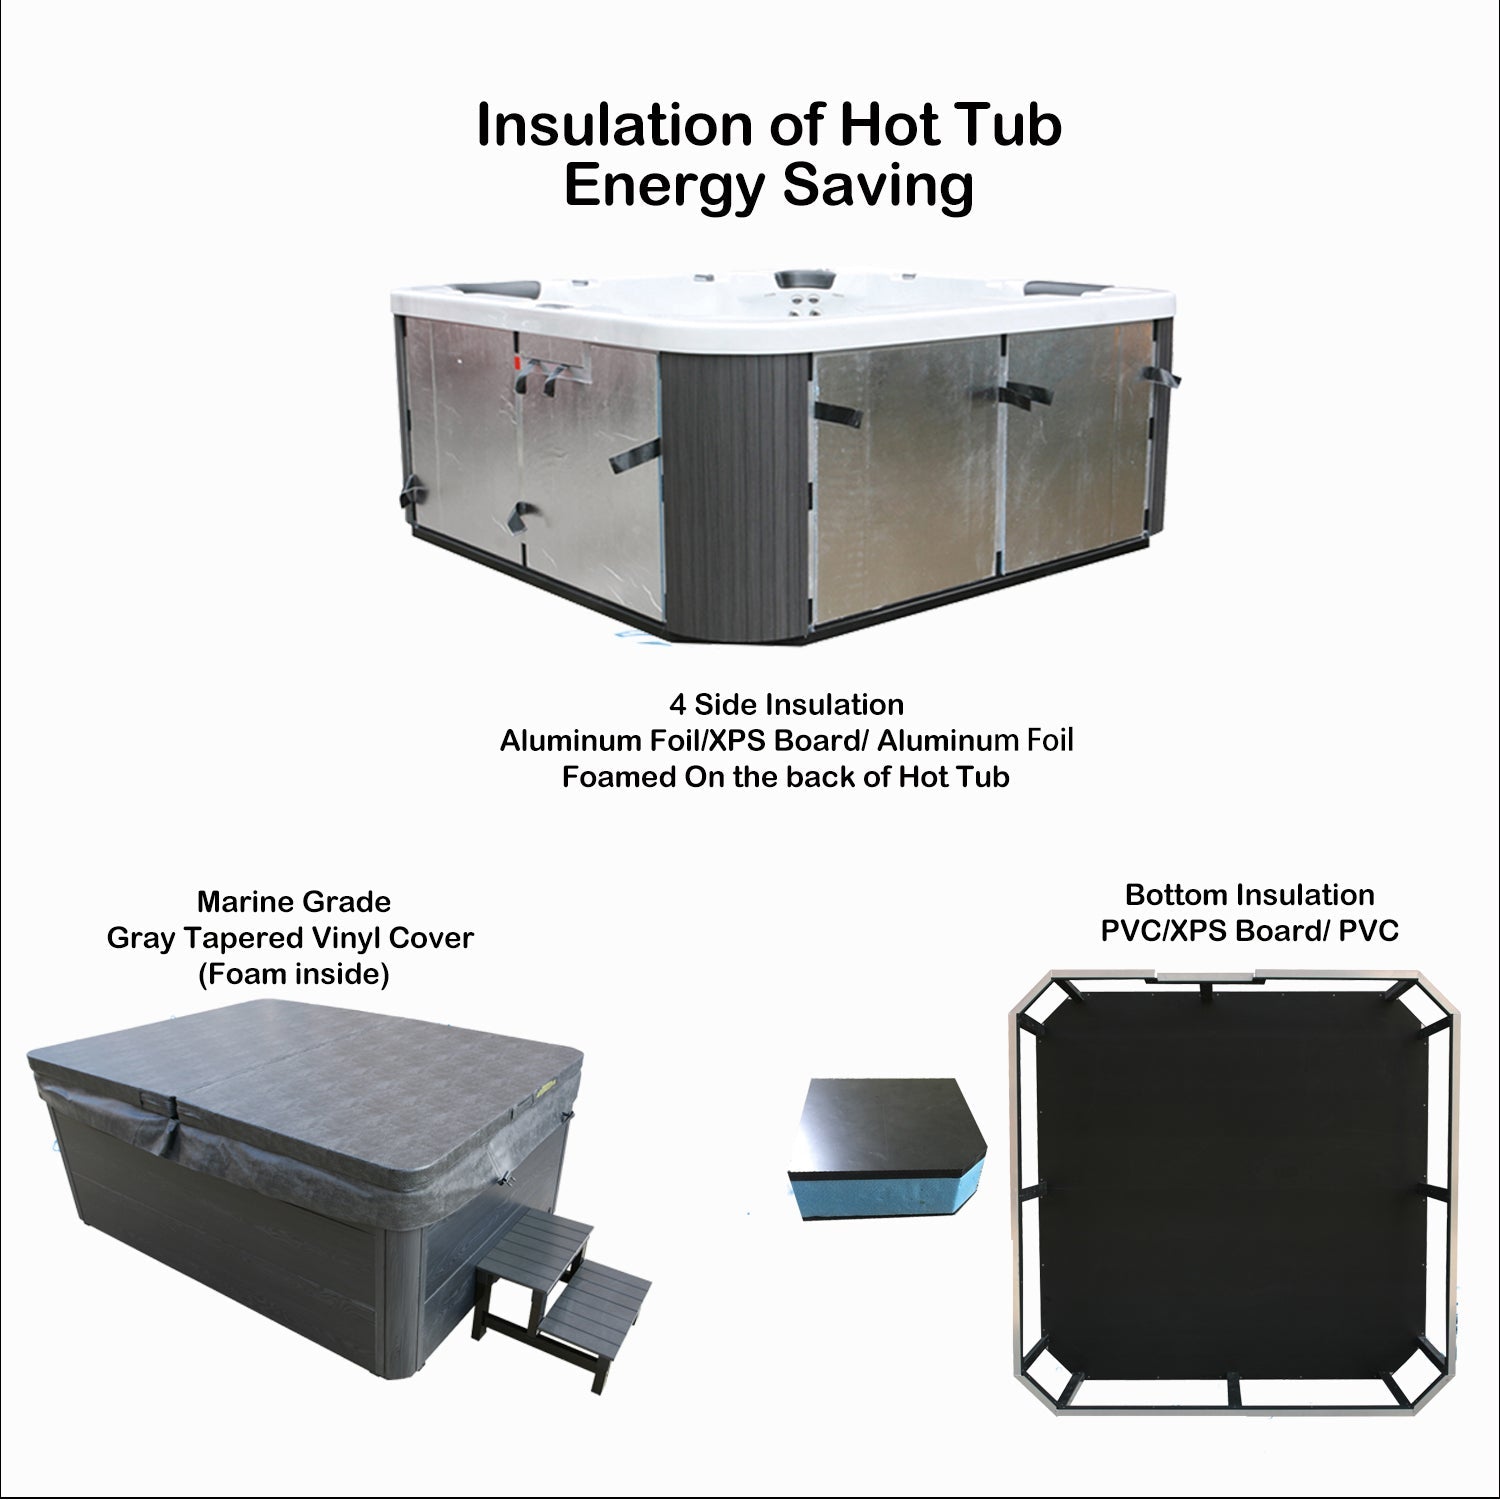 Energy efficient and cost saving insulation technology on acrylic hot tub